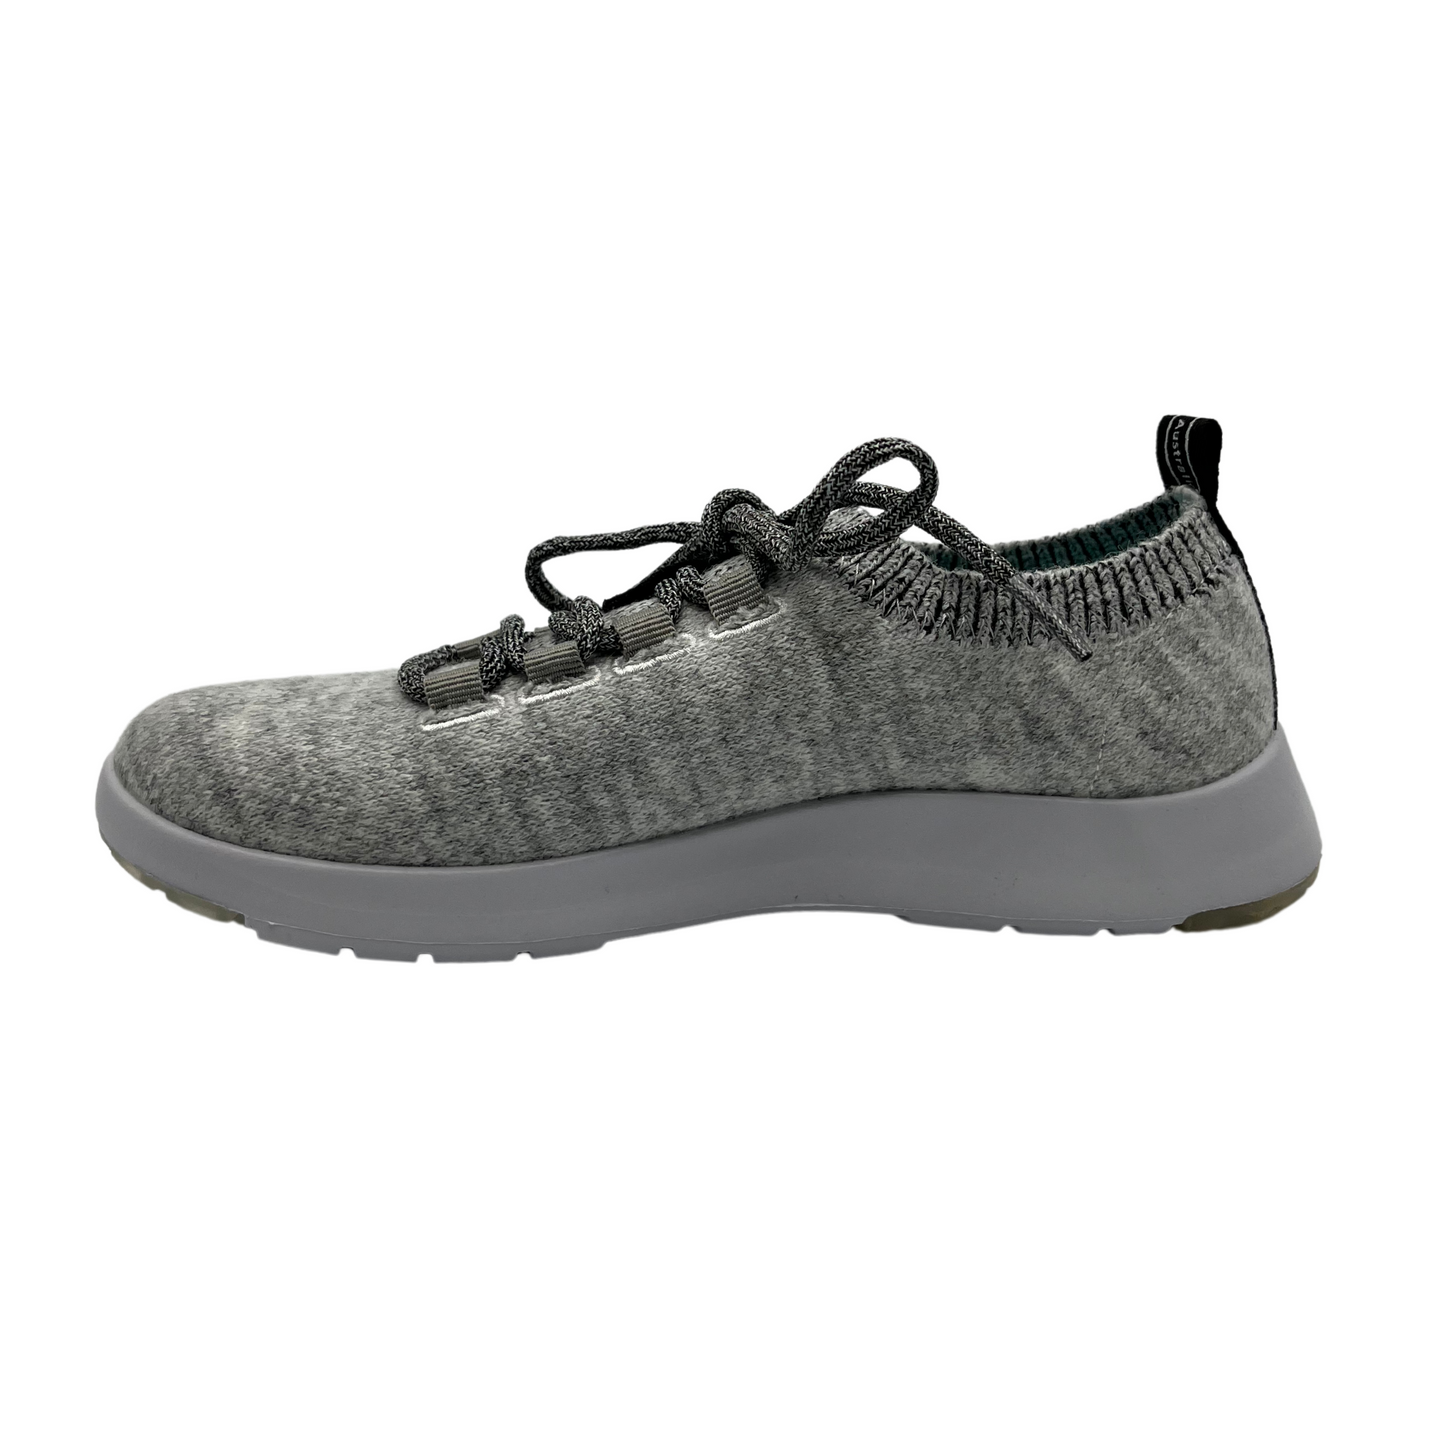 Left facing view of grey wool blend sneaker with heather grey laces and white EVA outsole